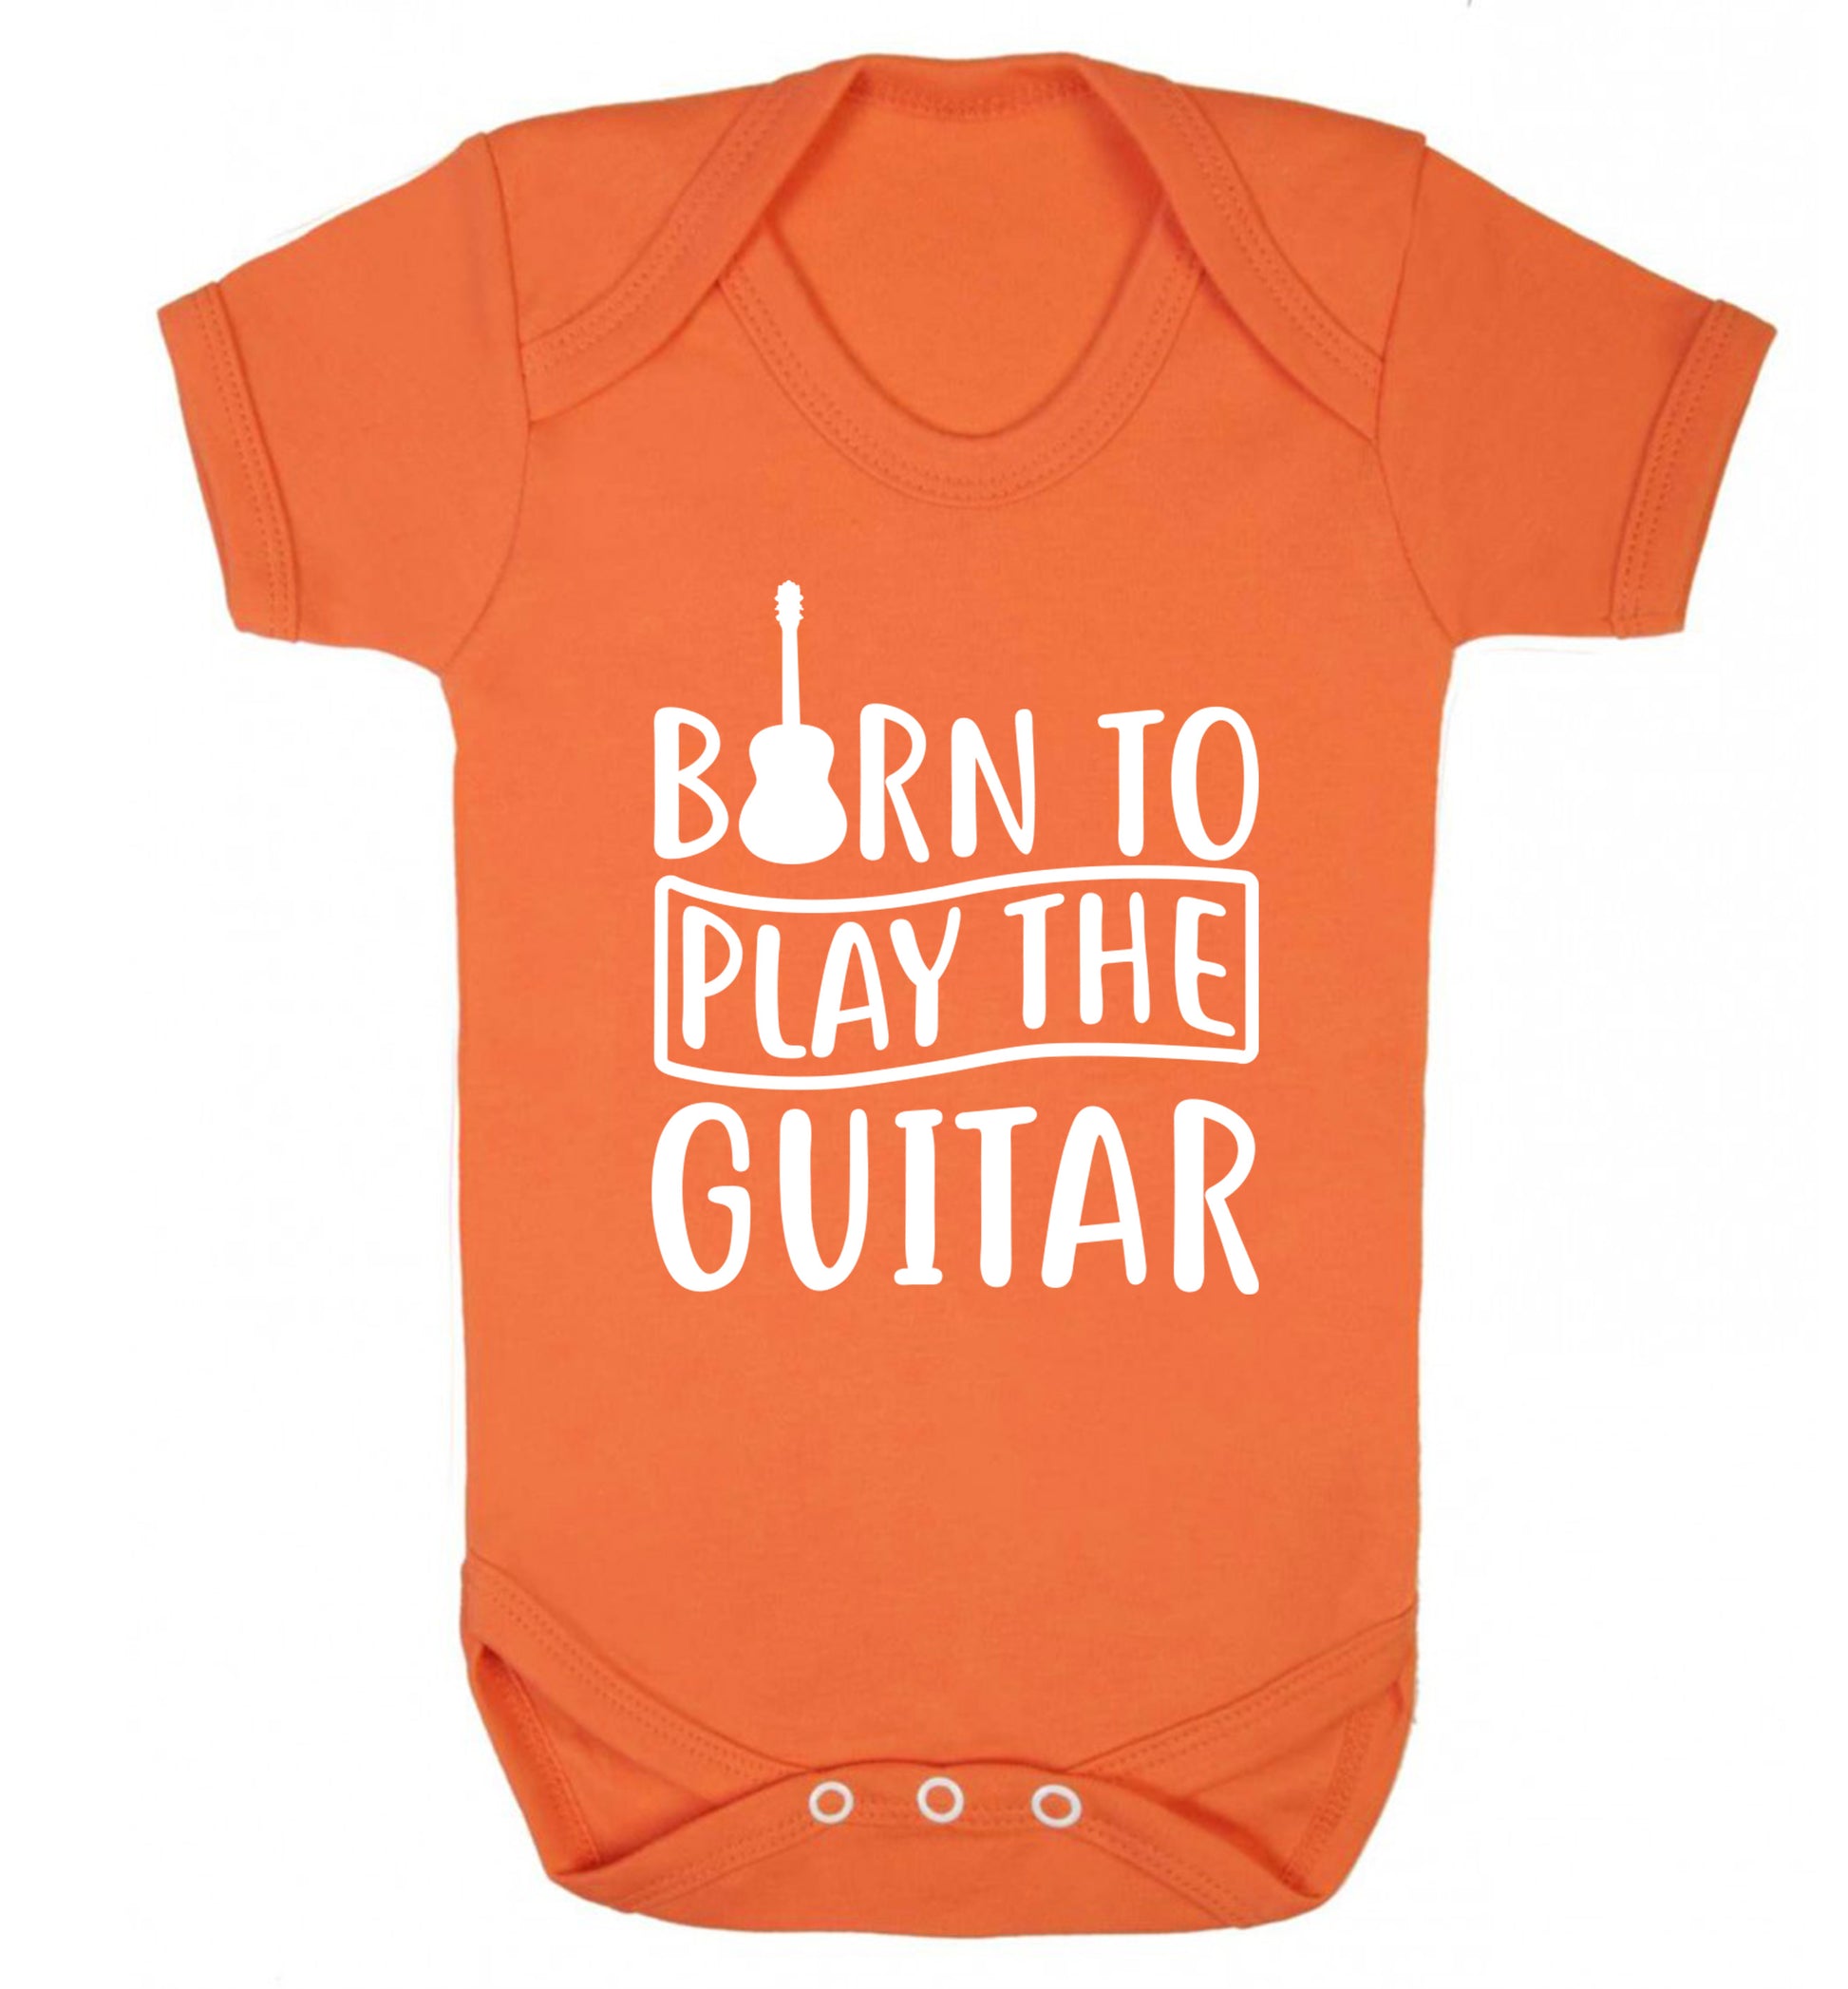 Born to play the guitar Baby Vest orange 18-24 months